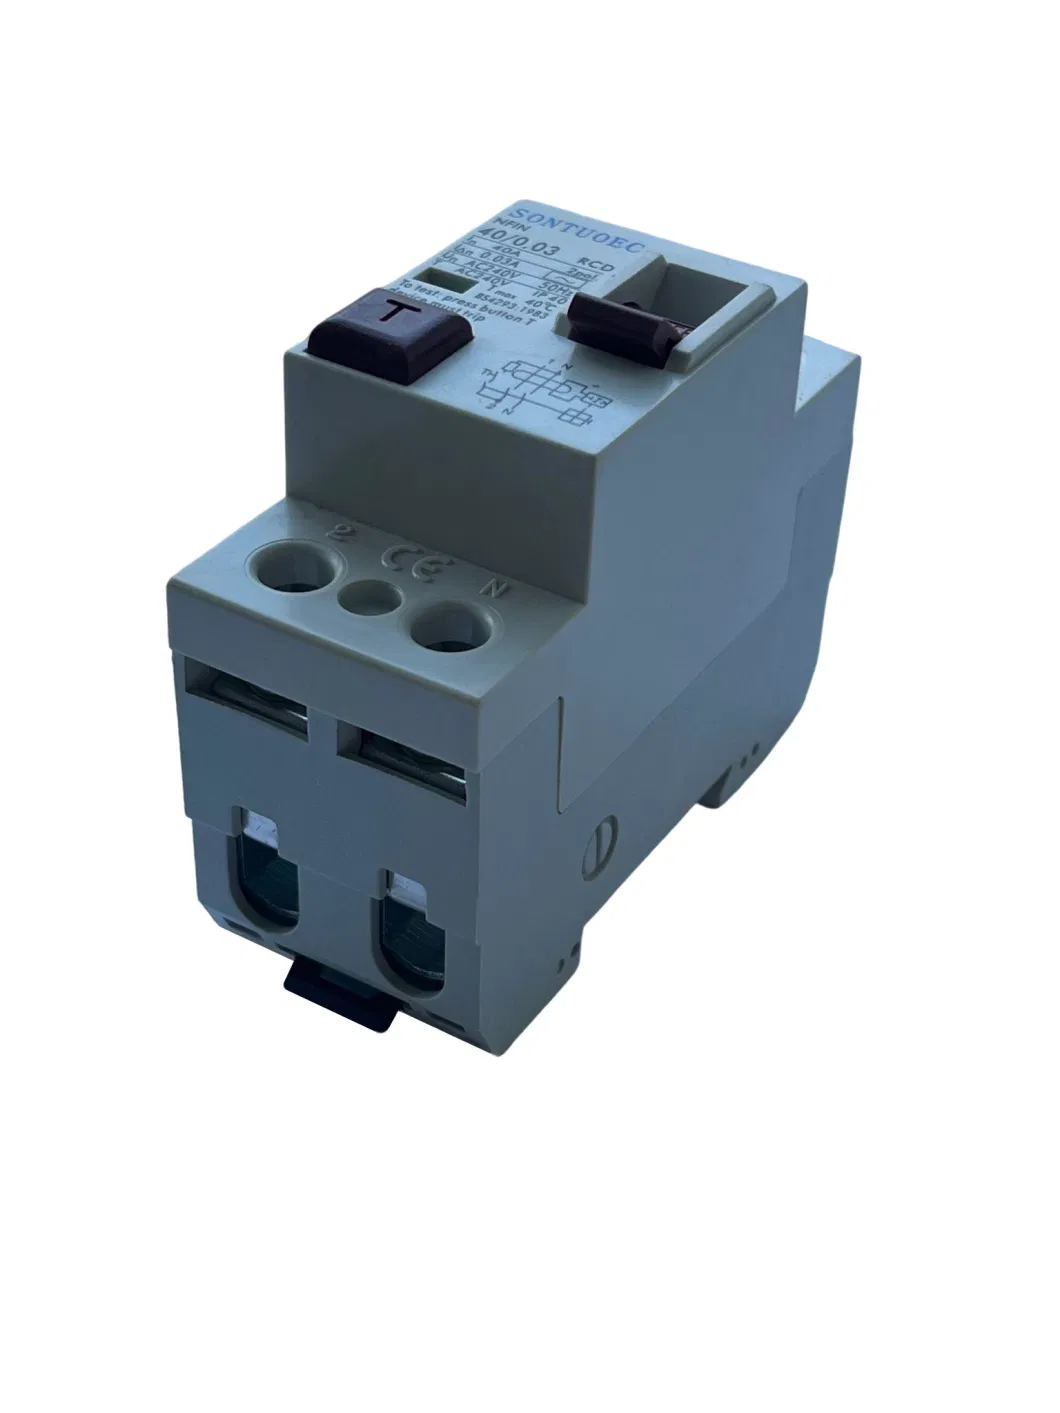 Nfin Series Residual Current Circuit Breaker RCD 2p, 4p Electronic or Magnetic Type a, AC Model